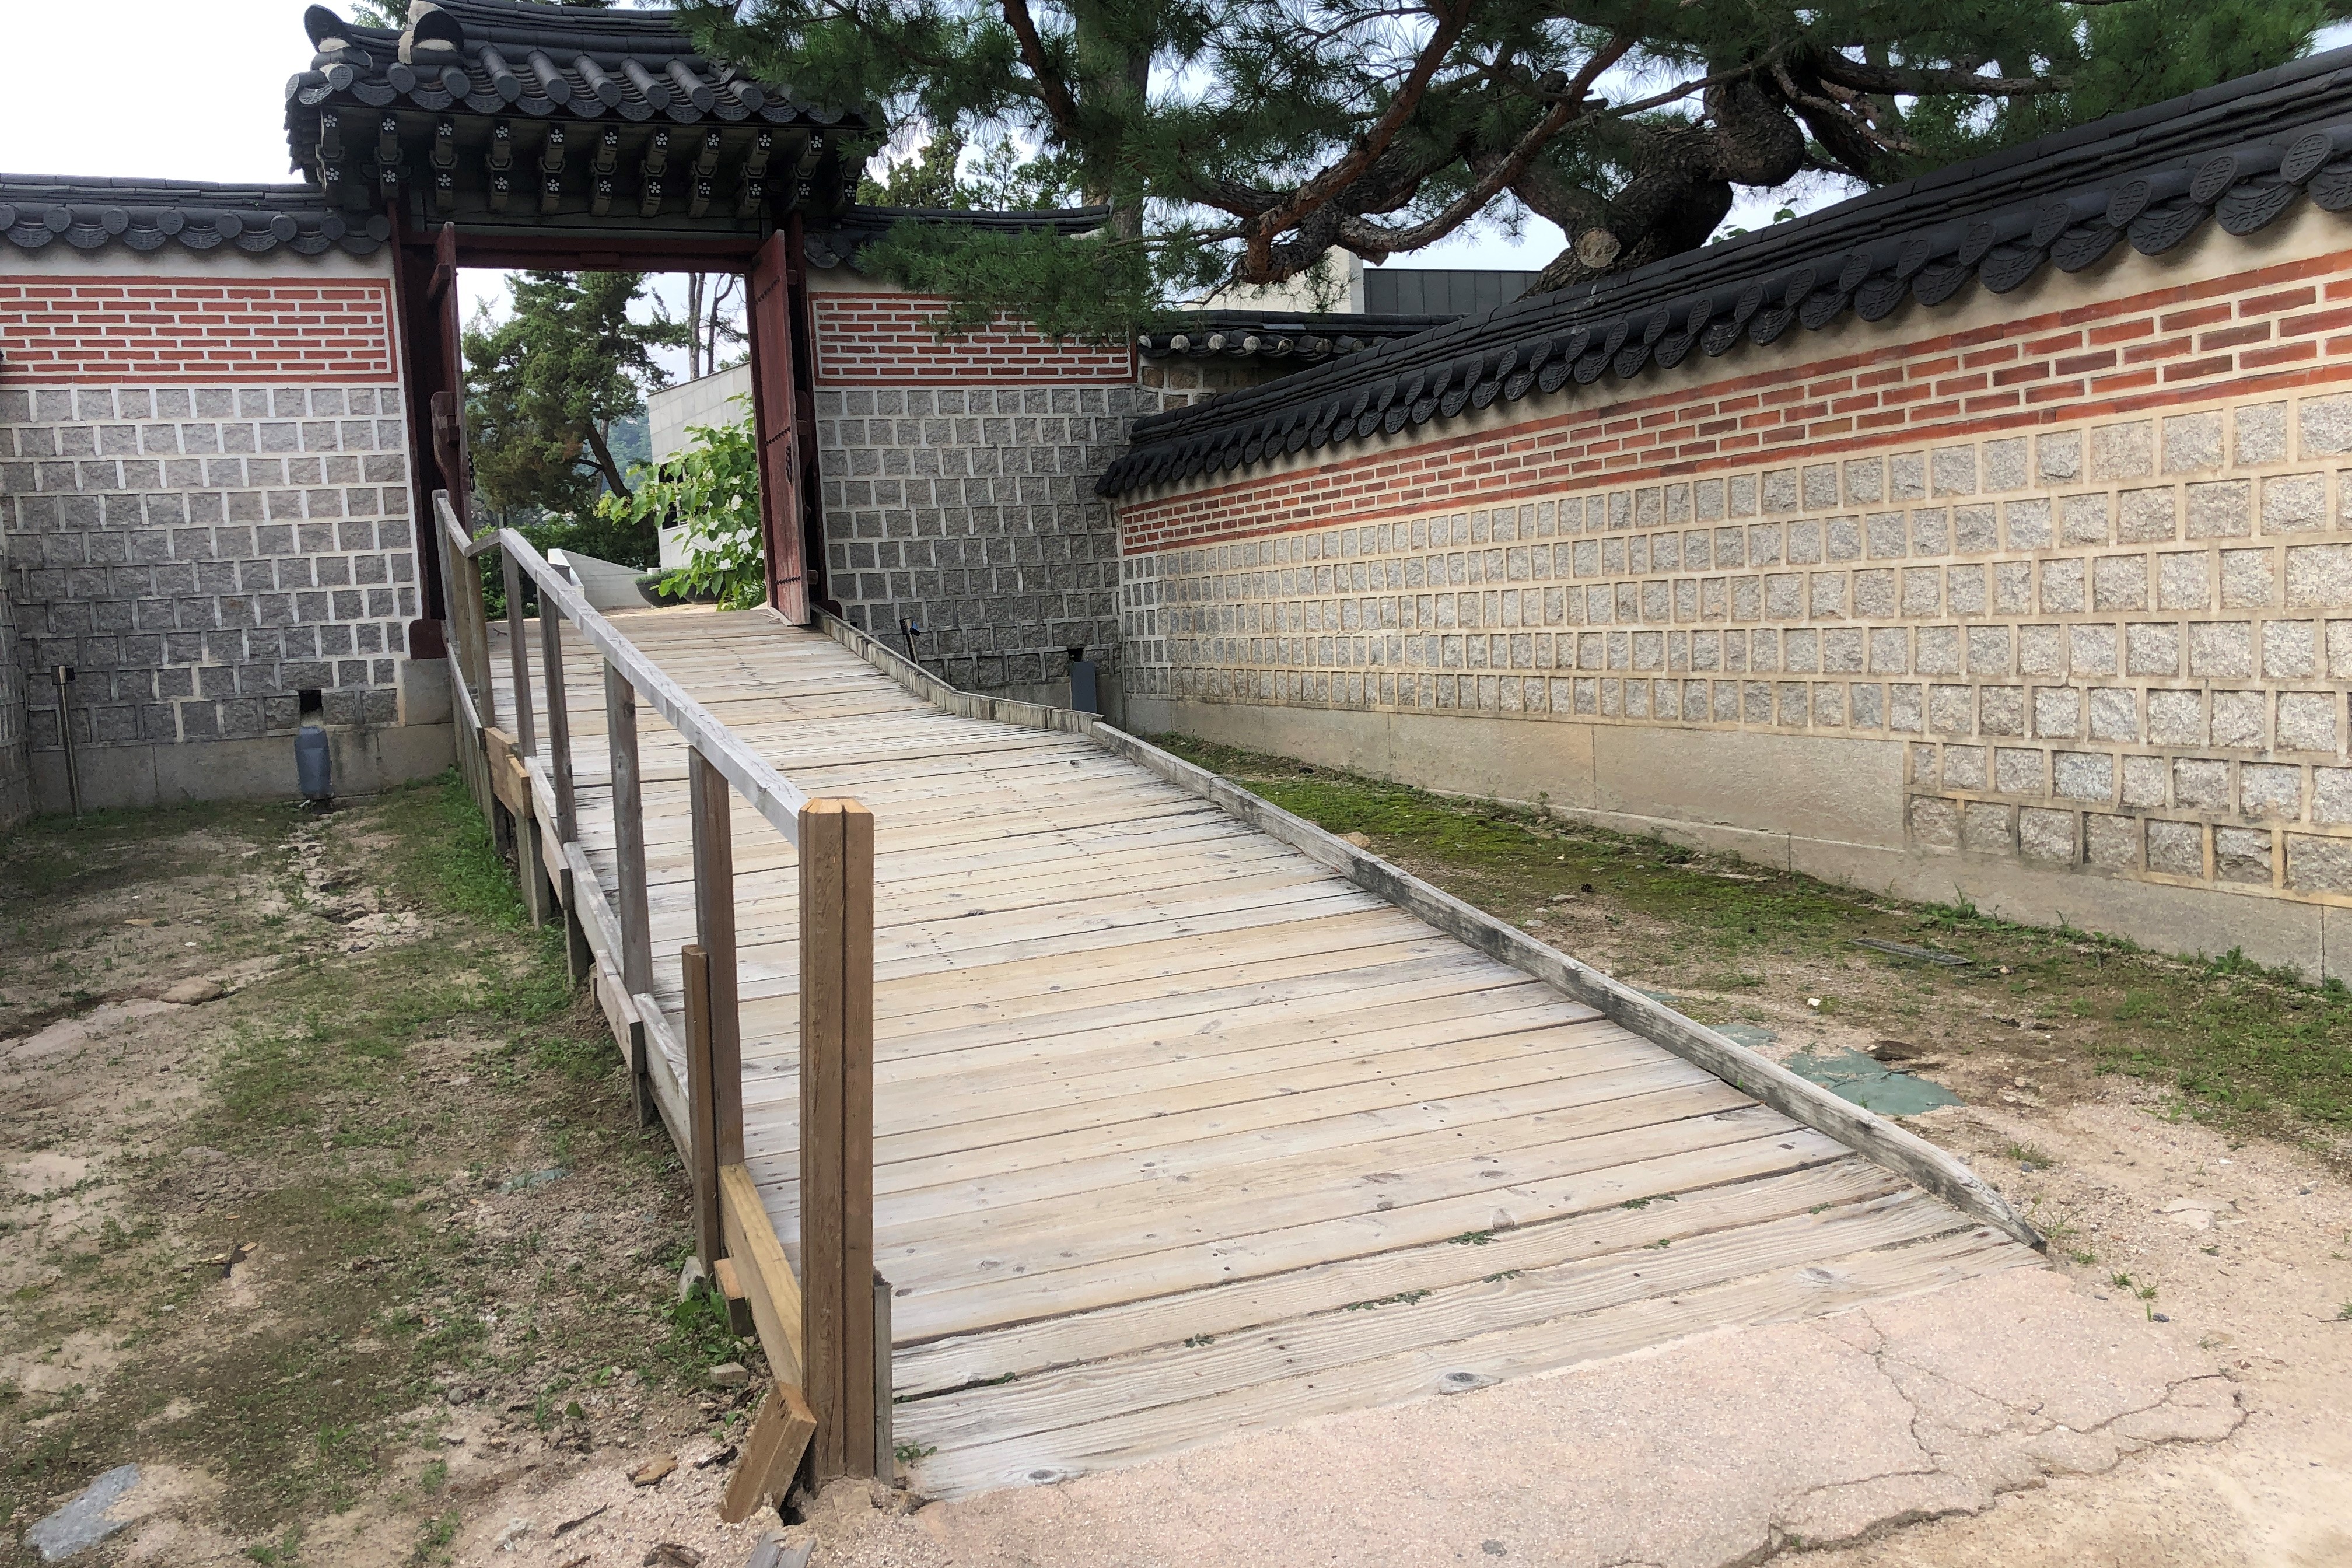 Entryway/ Main entrance0 : A long wooden ramp installed in a passageway between walls
